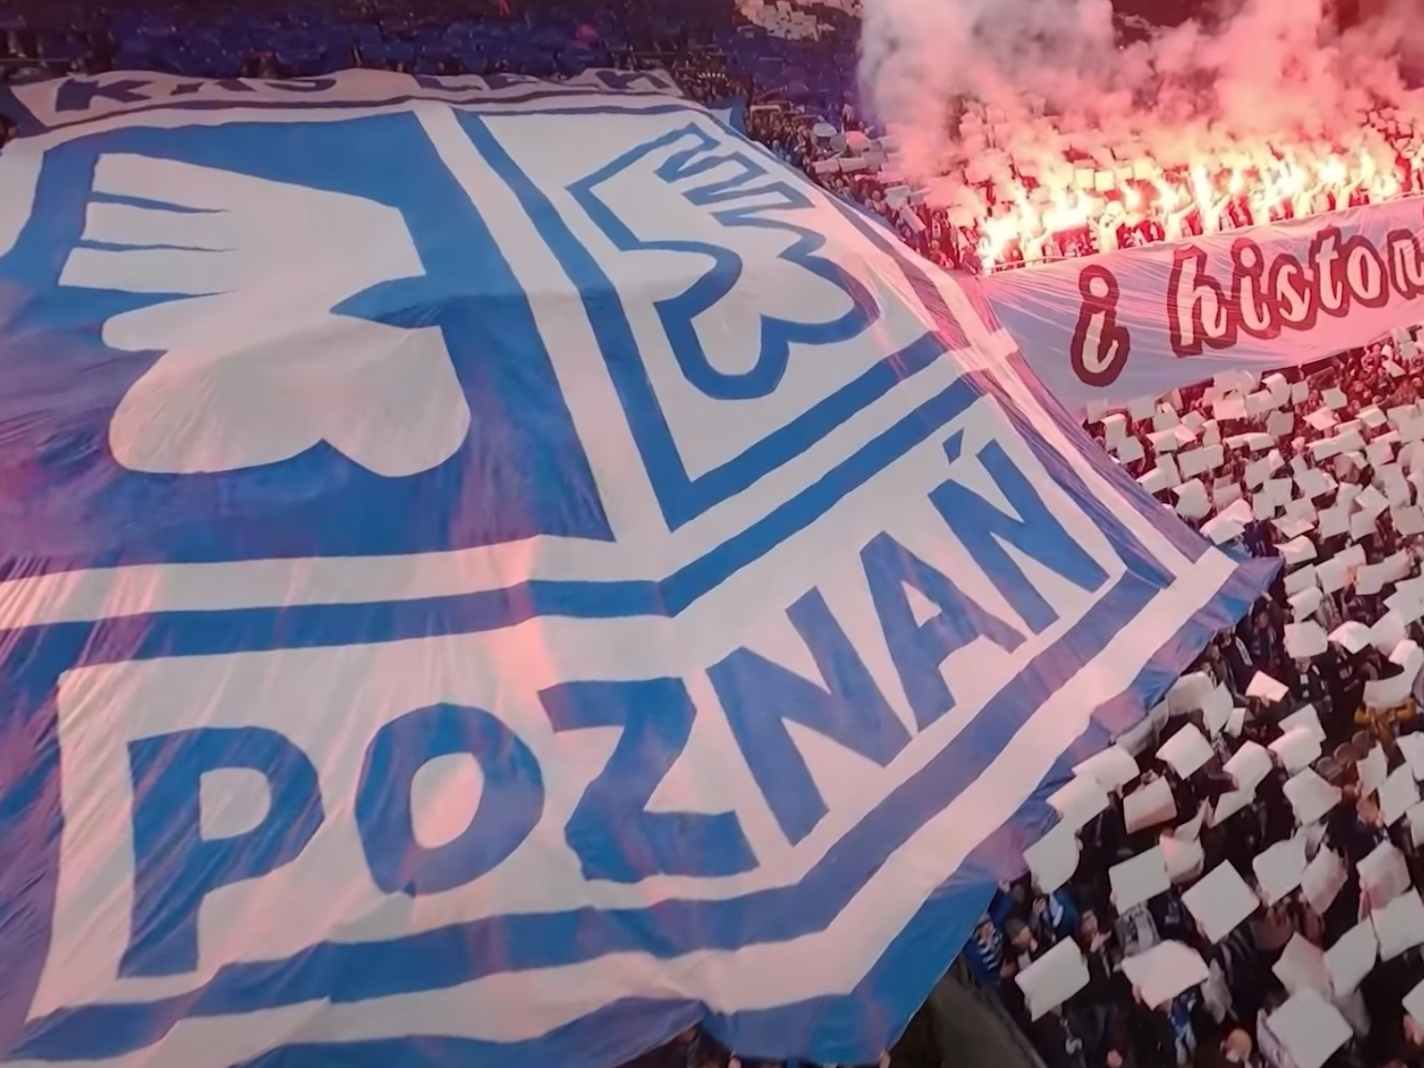 Stunning drone footage of Lech Poznan fans goes viral